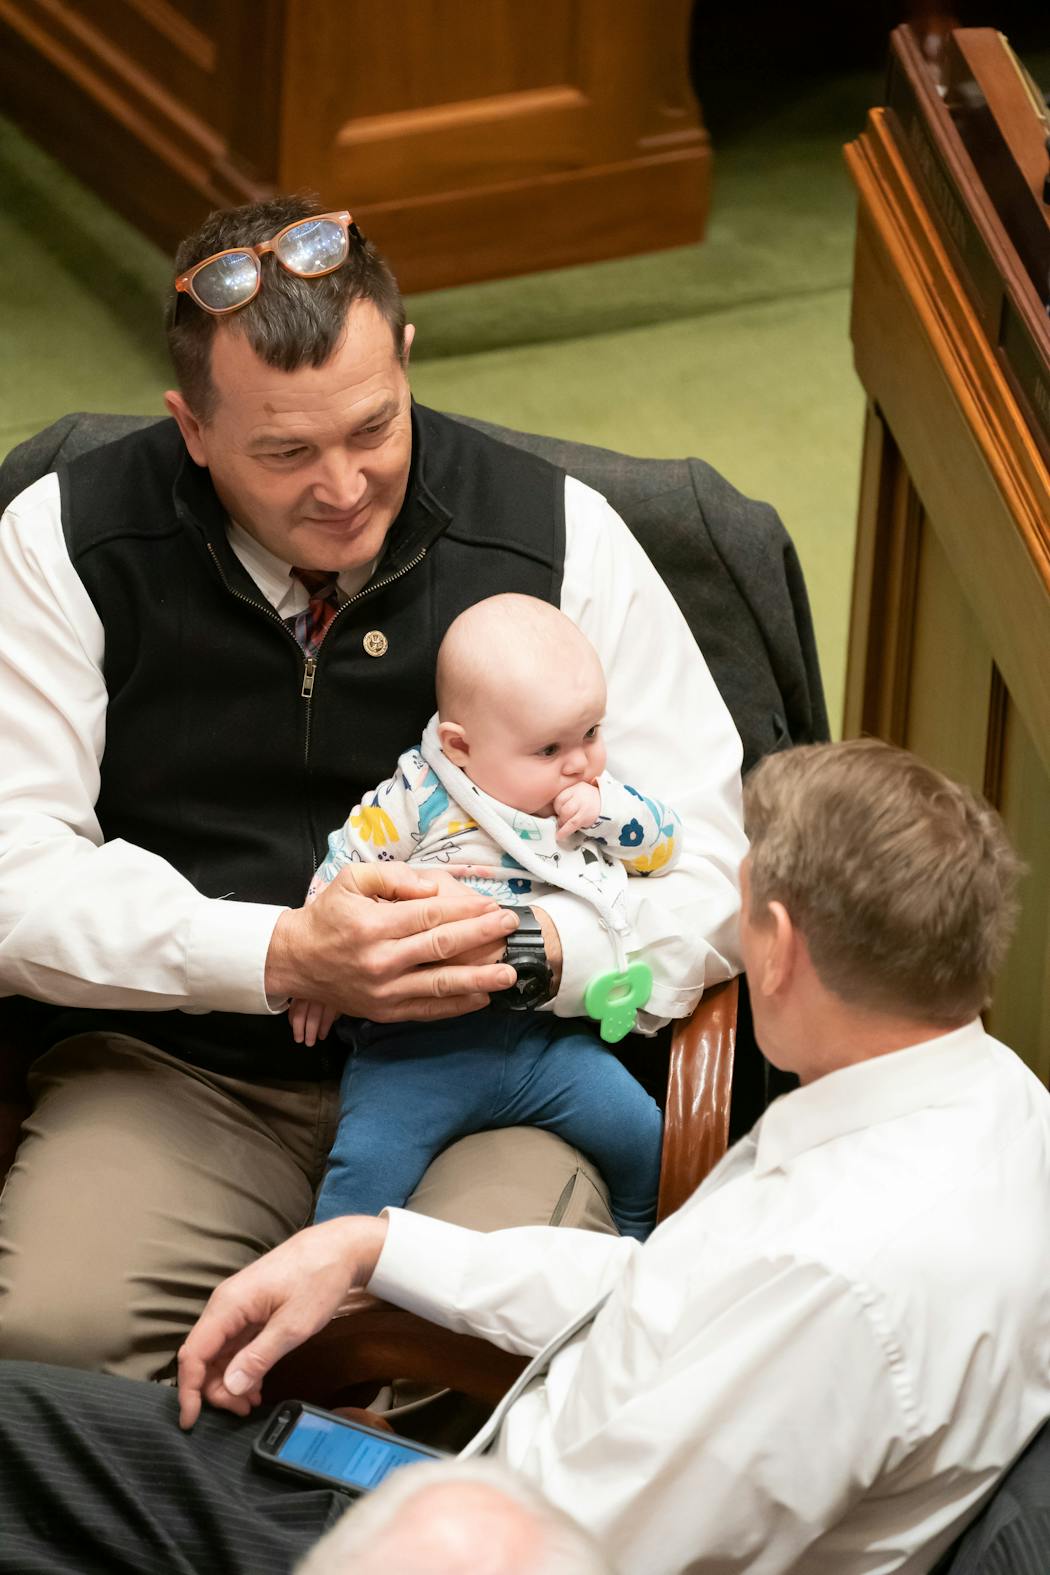 Rep. Leon Lillie, D-North St. Paul, took a turn holding Rep. Erin Koegel’s baby Clara, then five months old, in April 2019.